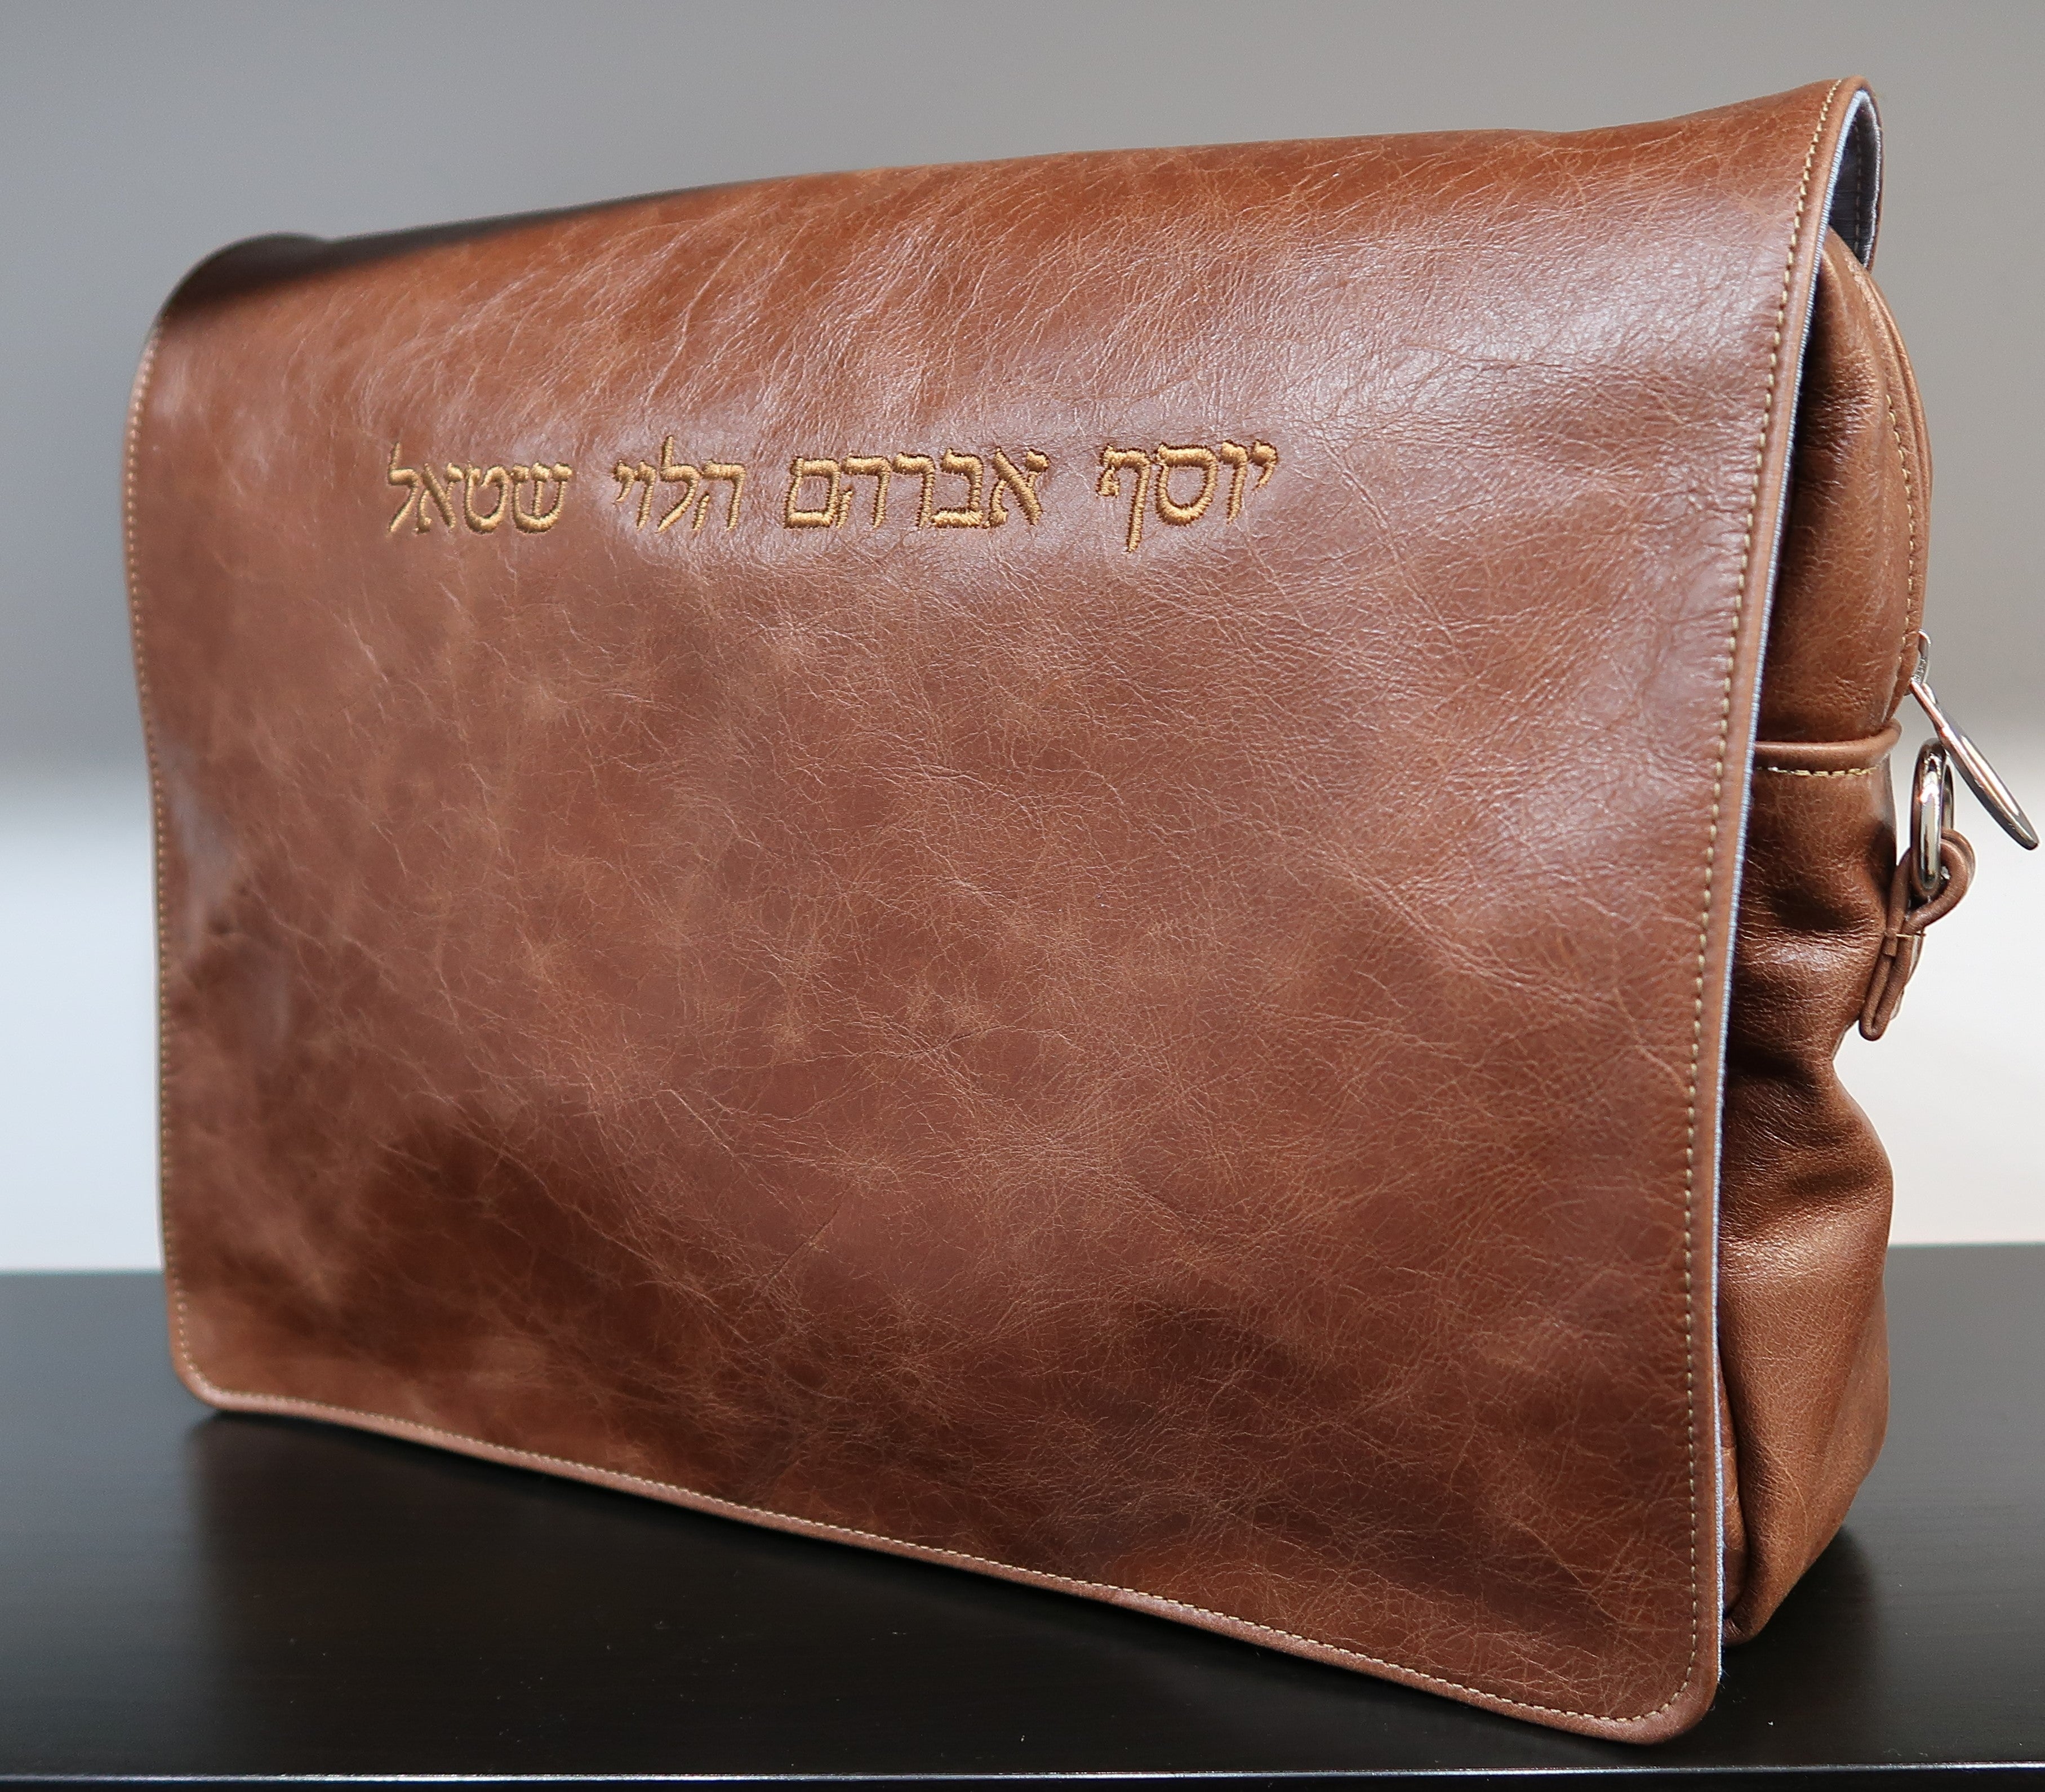 The original 3 dimensional messenger bag for every day use.